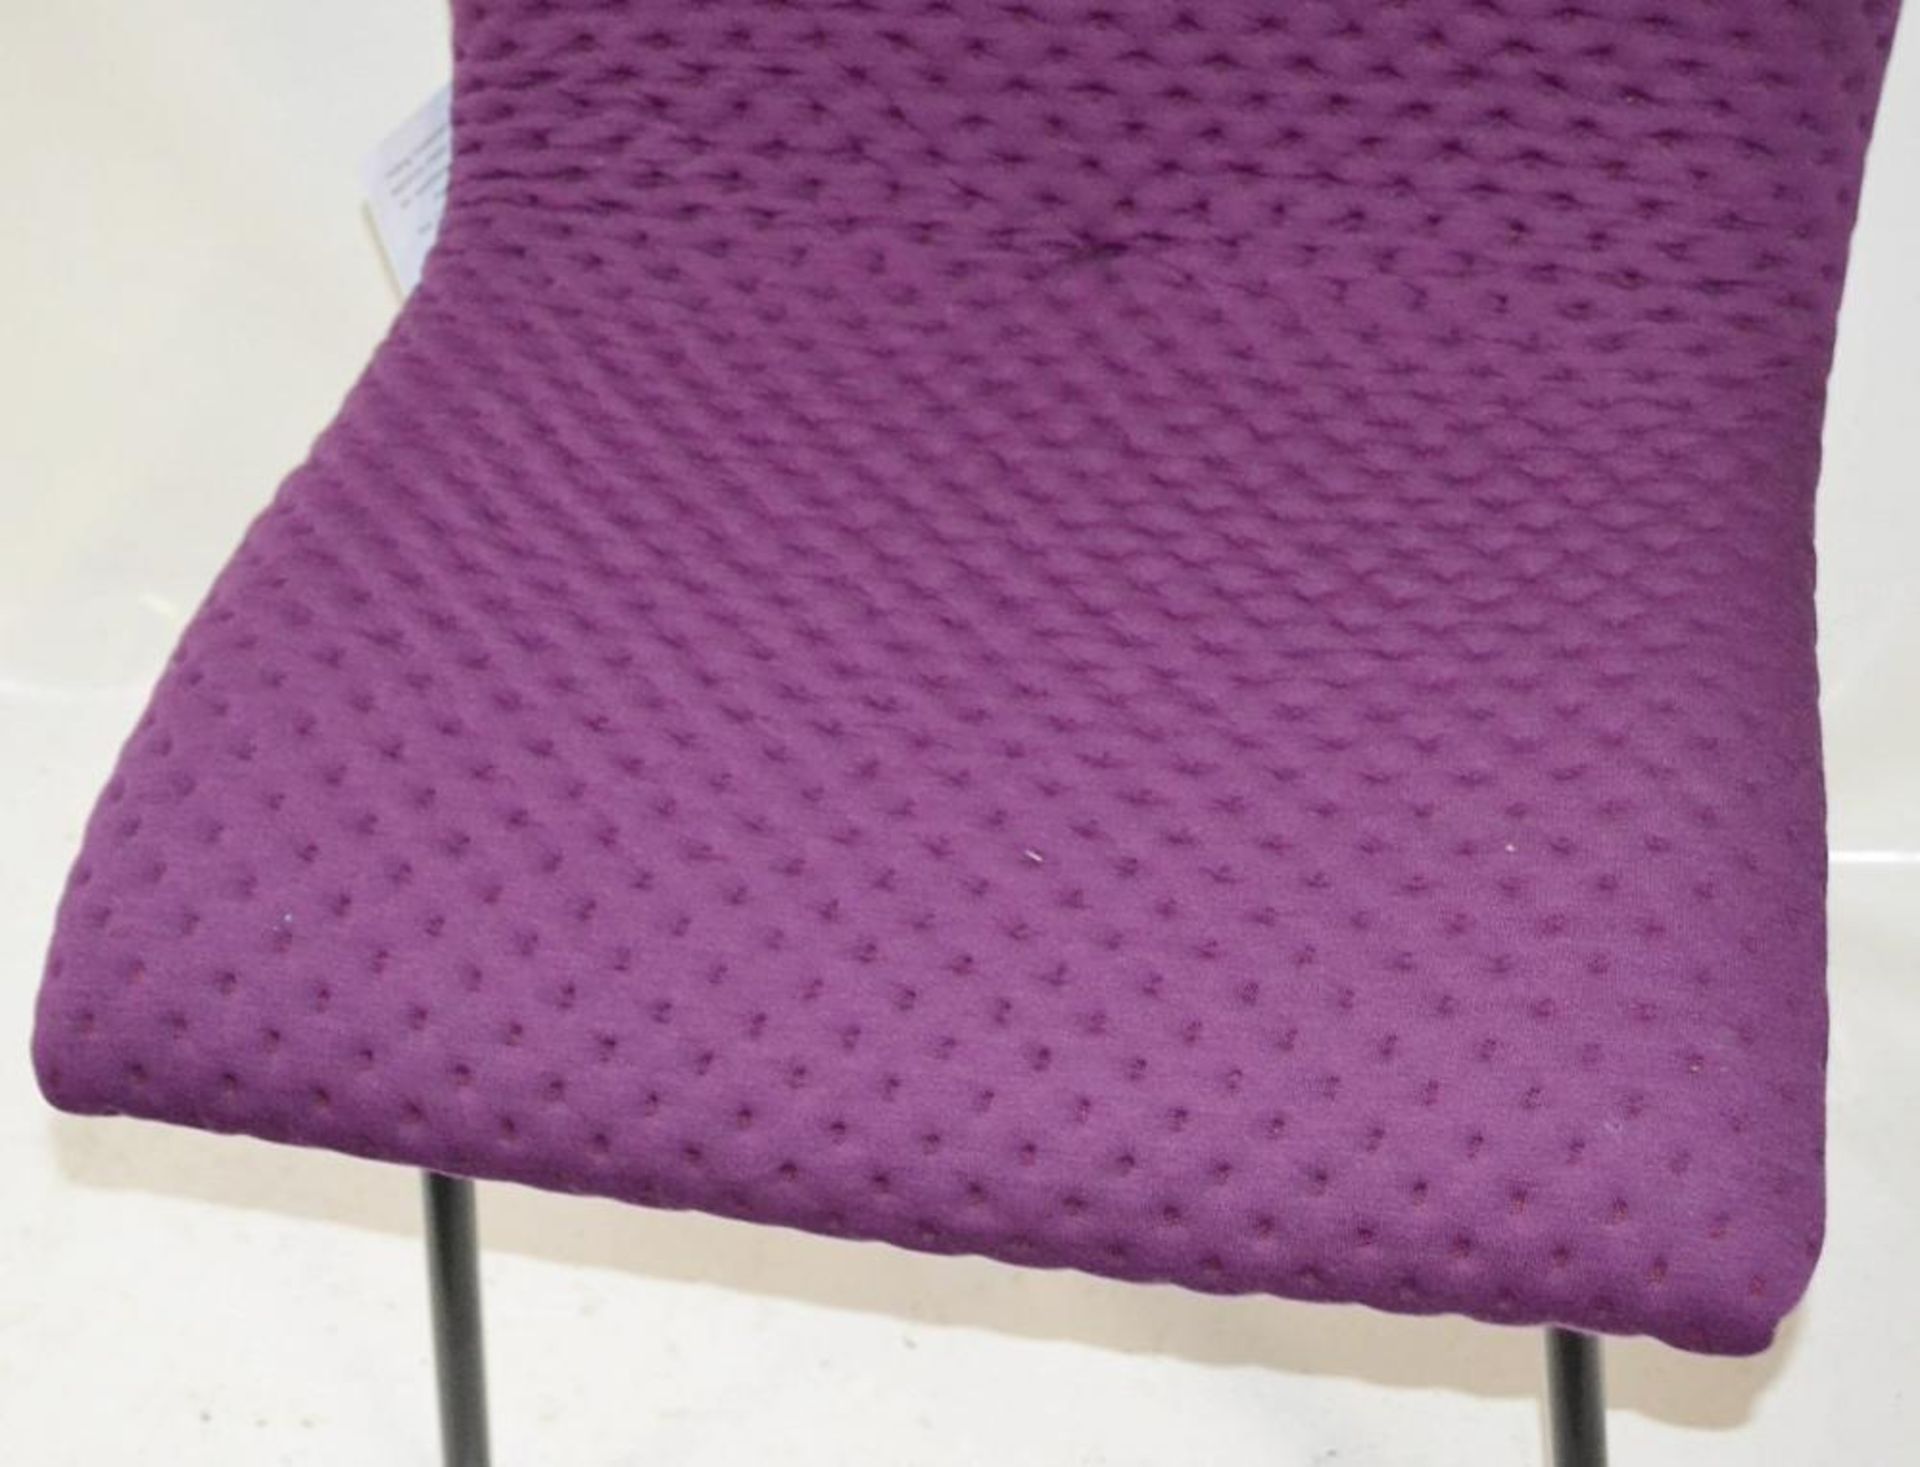 1 x Ligne Roset 'Calin' Chair - Features Bright Purple Upholsterey - Made In France - Ref: 6206608 P - Image 2 of 7